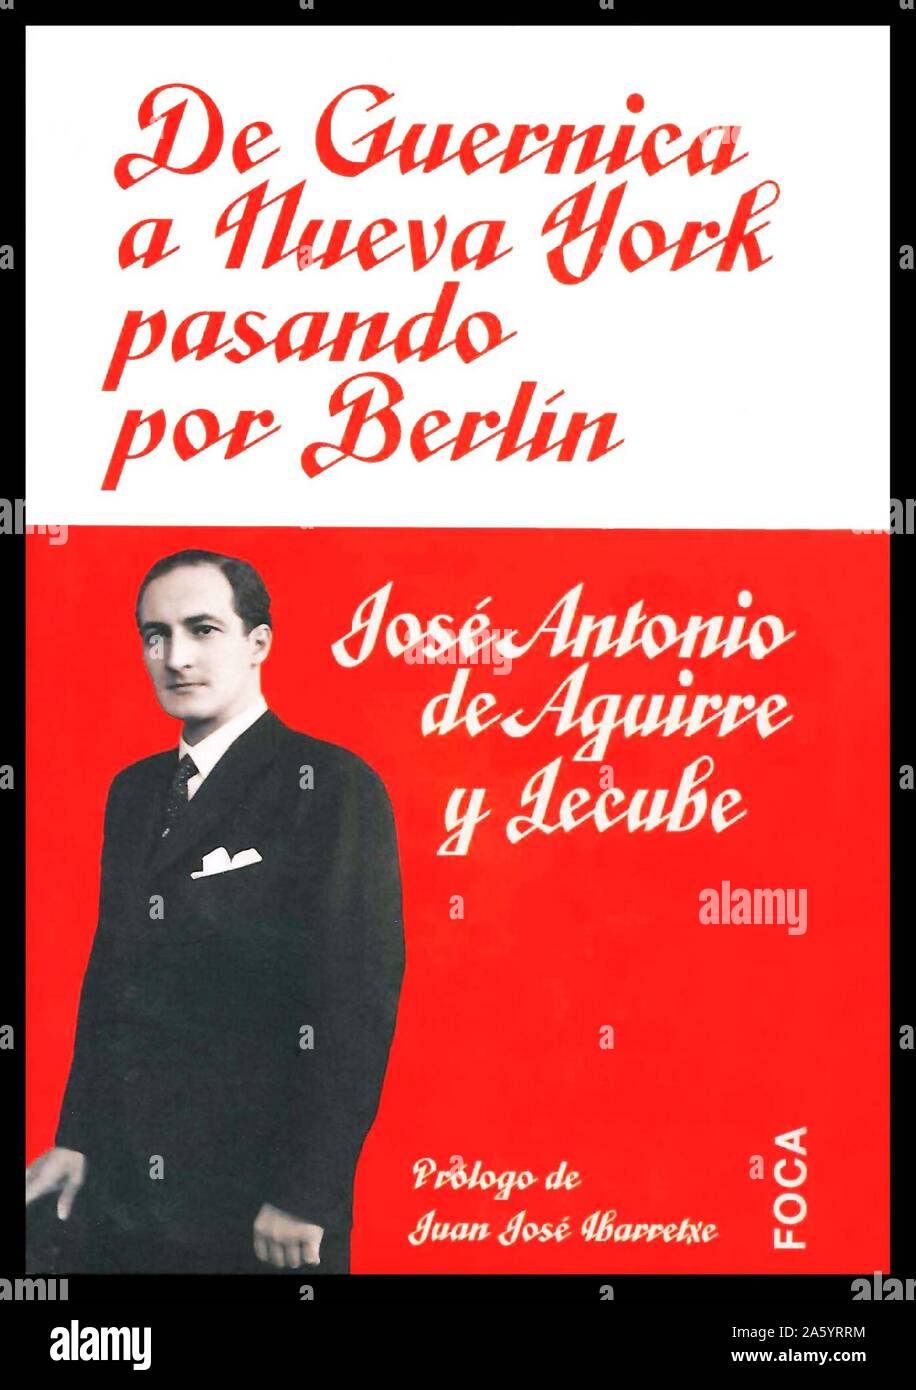 Biography (front cover) of José Antonio Aguirre y Lecube (6 March 1904 – 22 March 1960) was a major political figure of Basque nationalism and the first President of the Basque Autonomous Community, from 1936 to 1960. Stock Photo